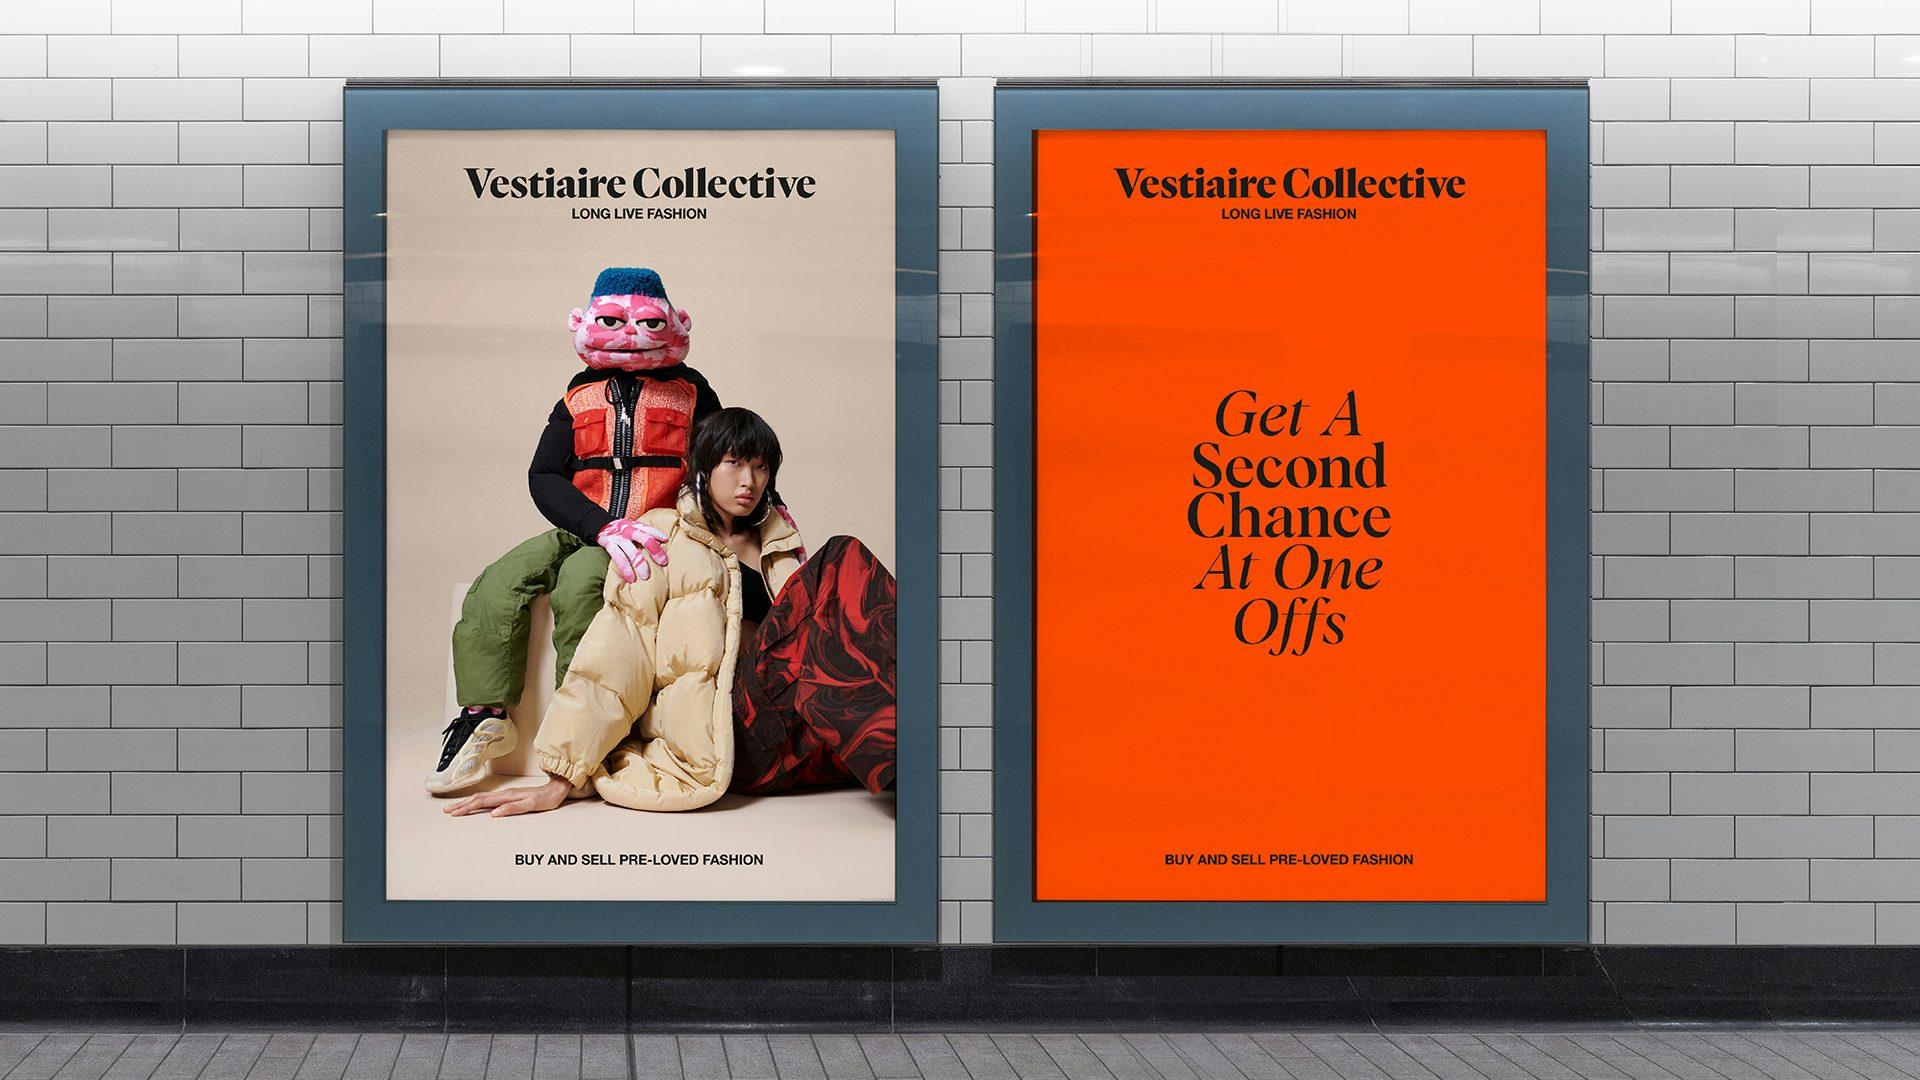 LONG LIVE FASHION: Vestiaire Collective relaunches with a daring